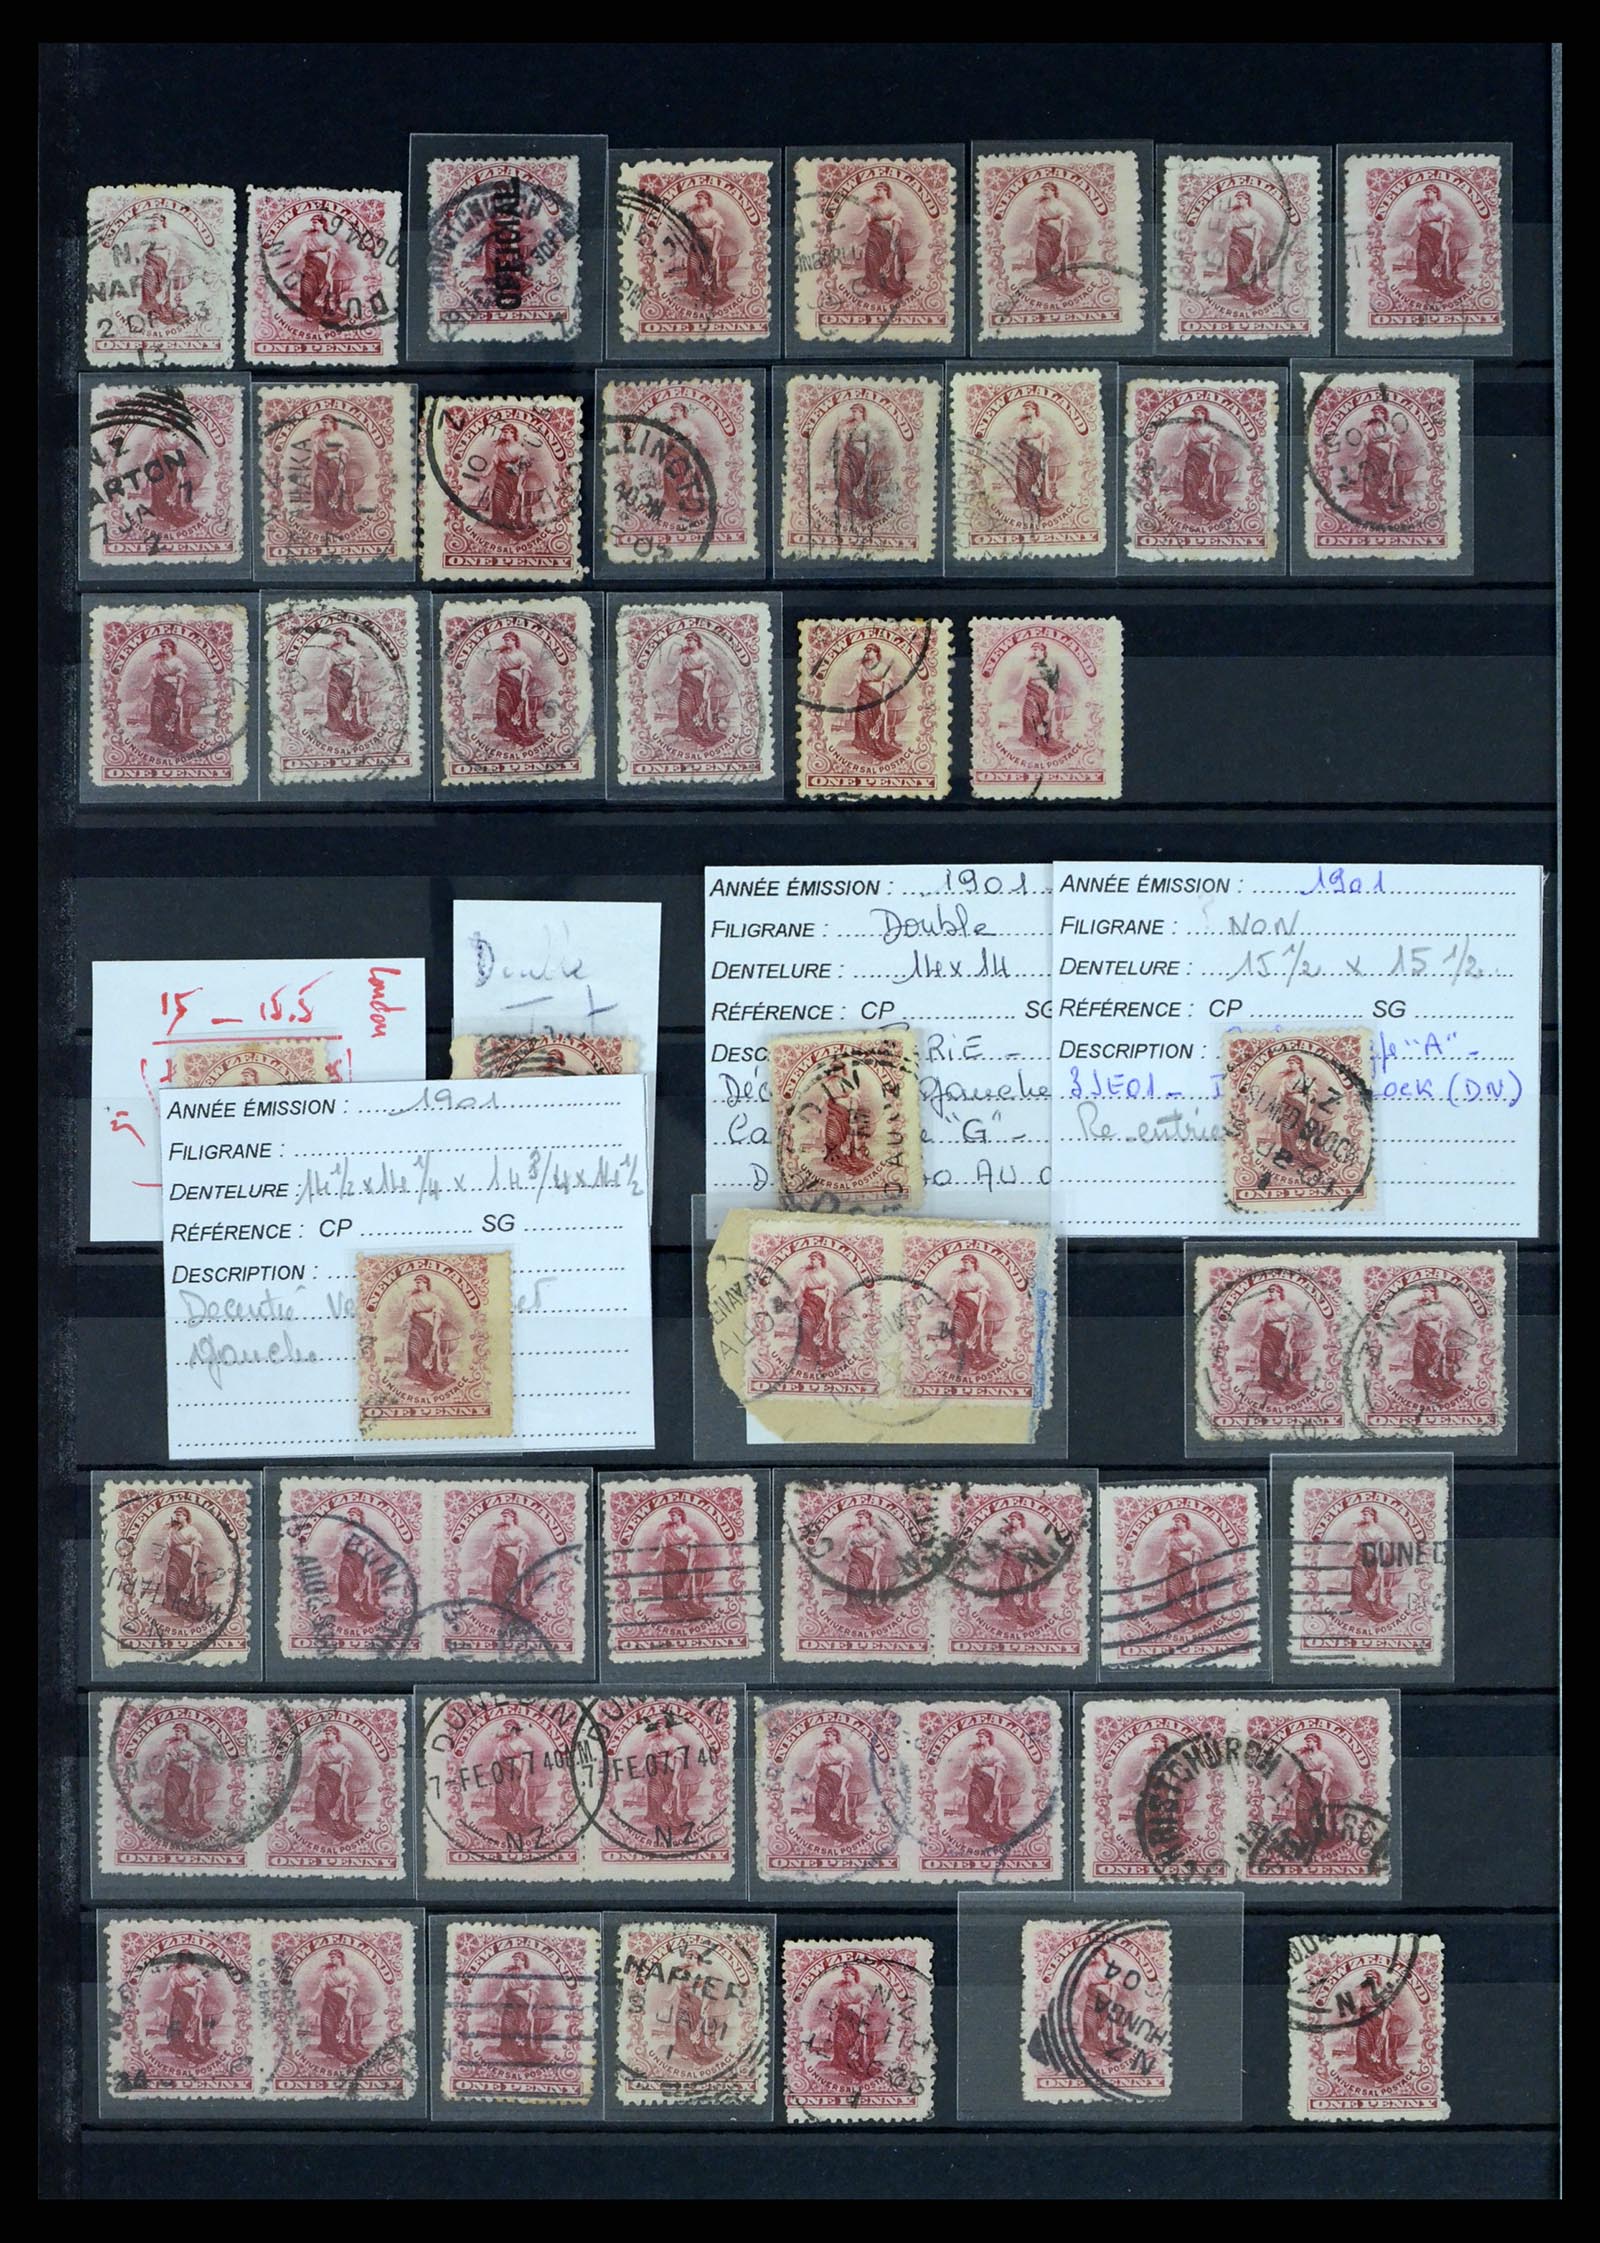 37434 032 - Stamp collection 37434 New Zealand 1901-1908.